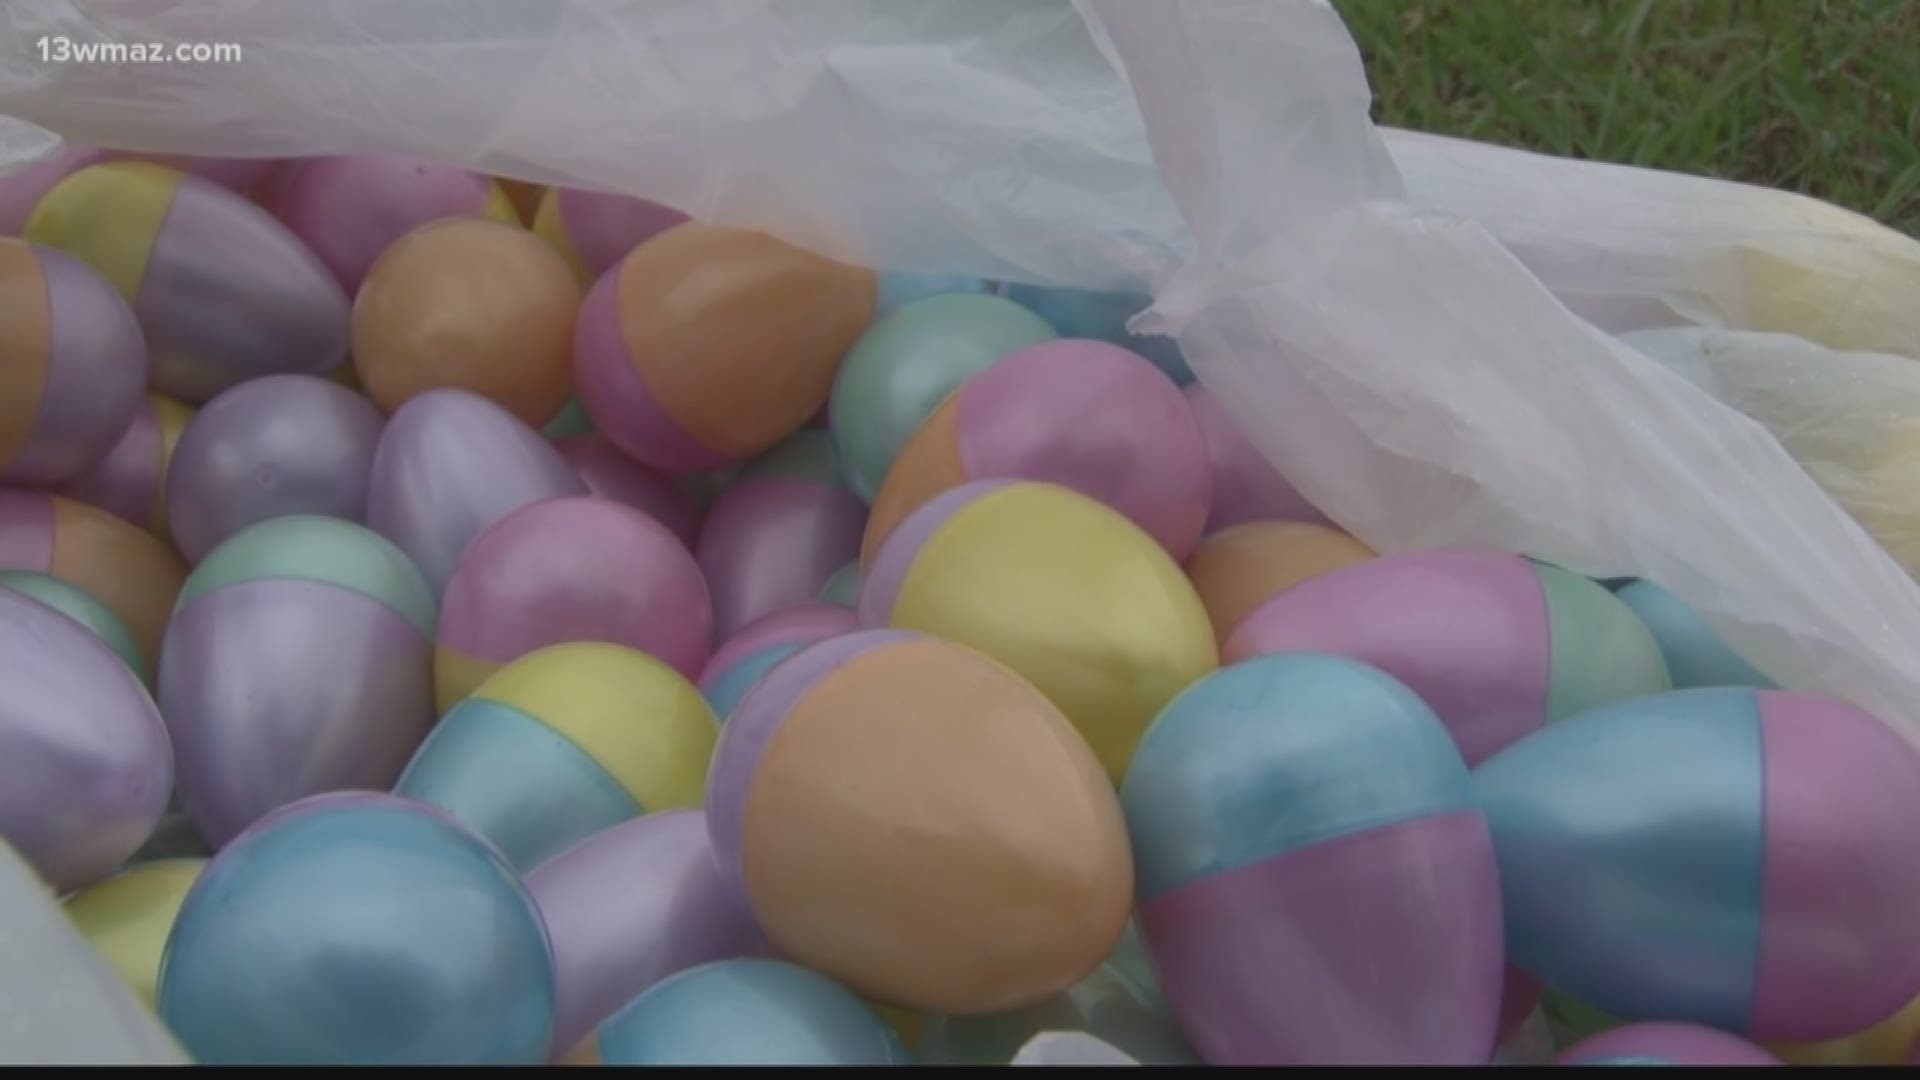 Dozens of people showed up to Tattnall Square Park in Macon for an Easter Egg Hunt hosted by New City Church. Kids filled their baskets with dozens of eggs scattered across the lawn.